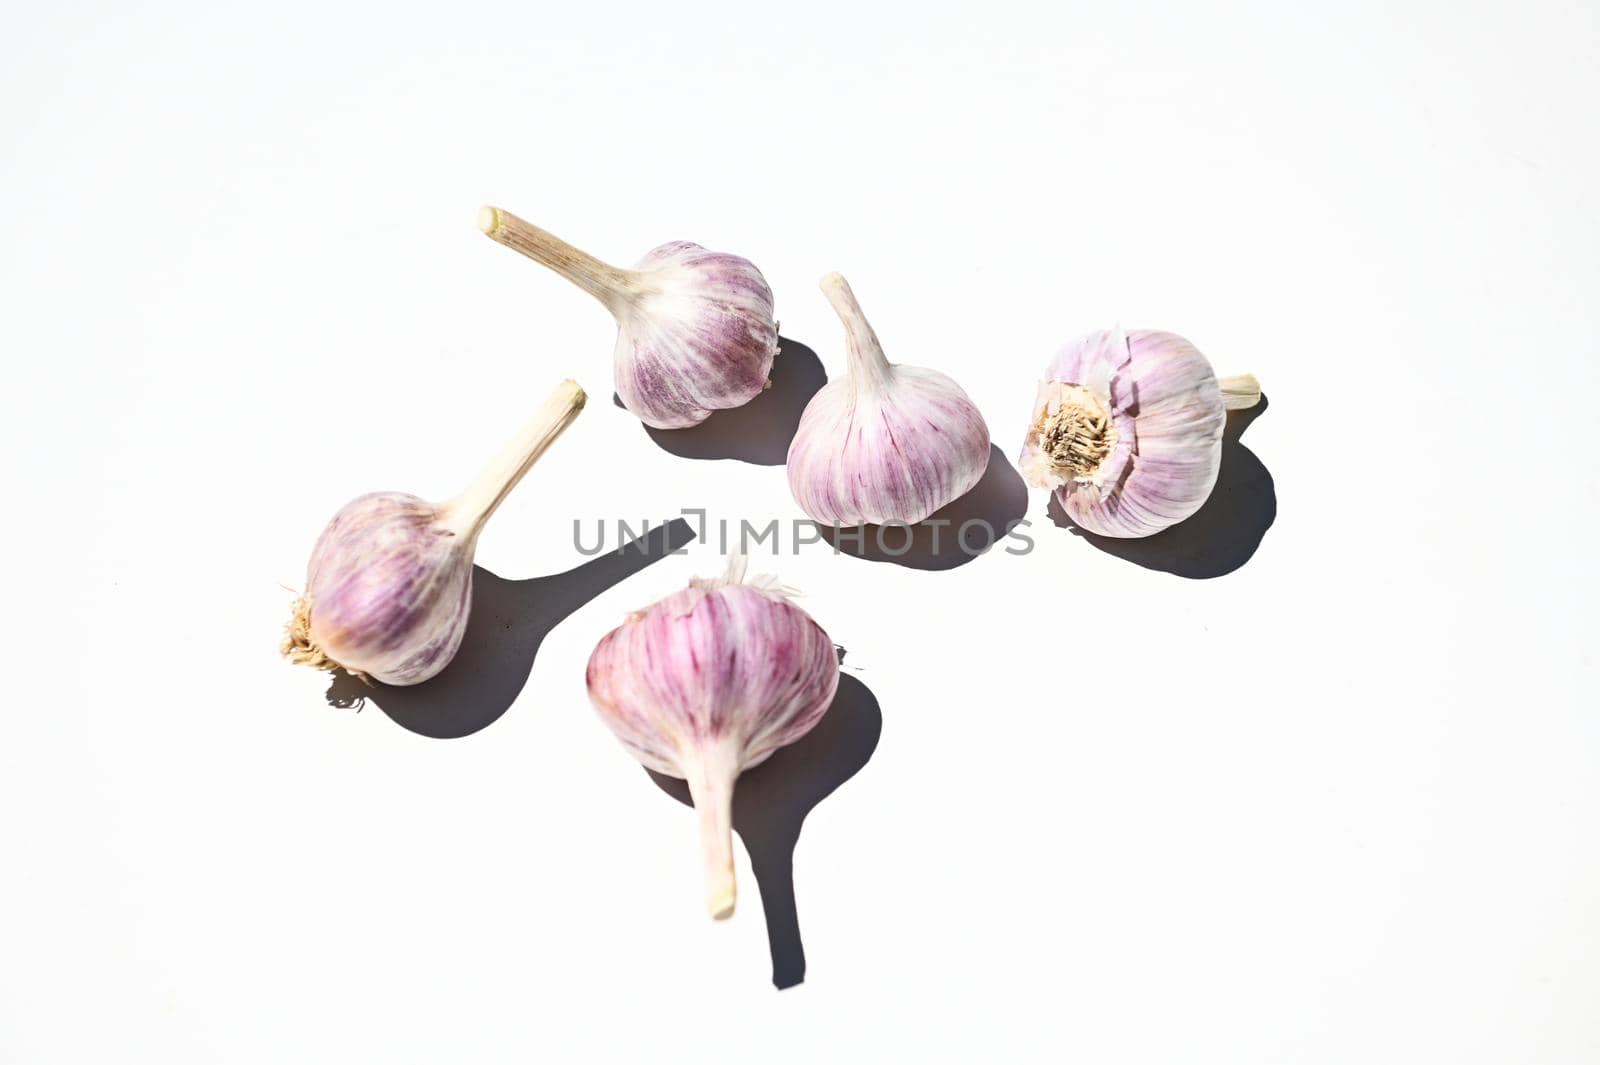 Horizontal studio shot. Flat lay composition of raw garlic heads isolated on white background. Copy ad space. Close-up by artgf